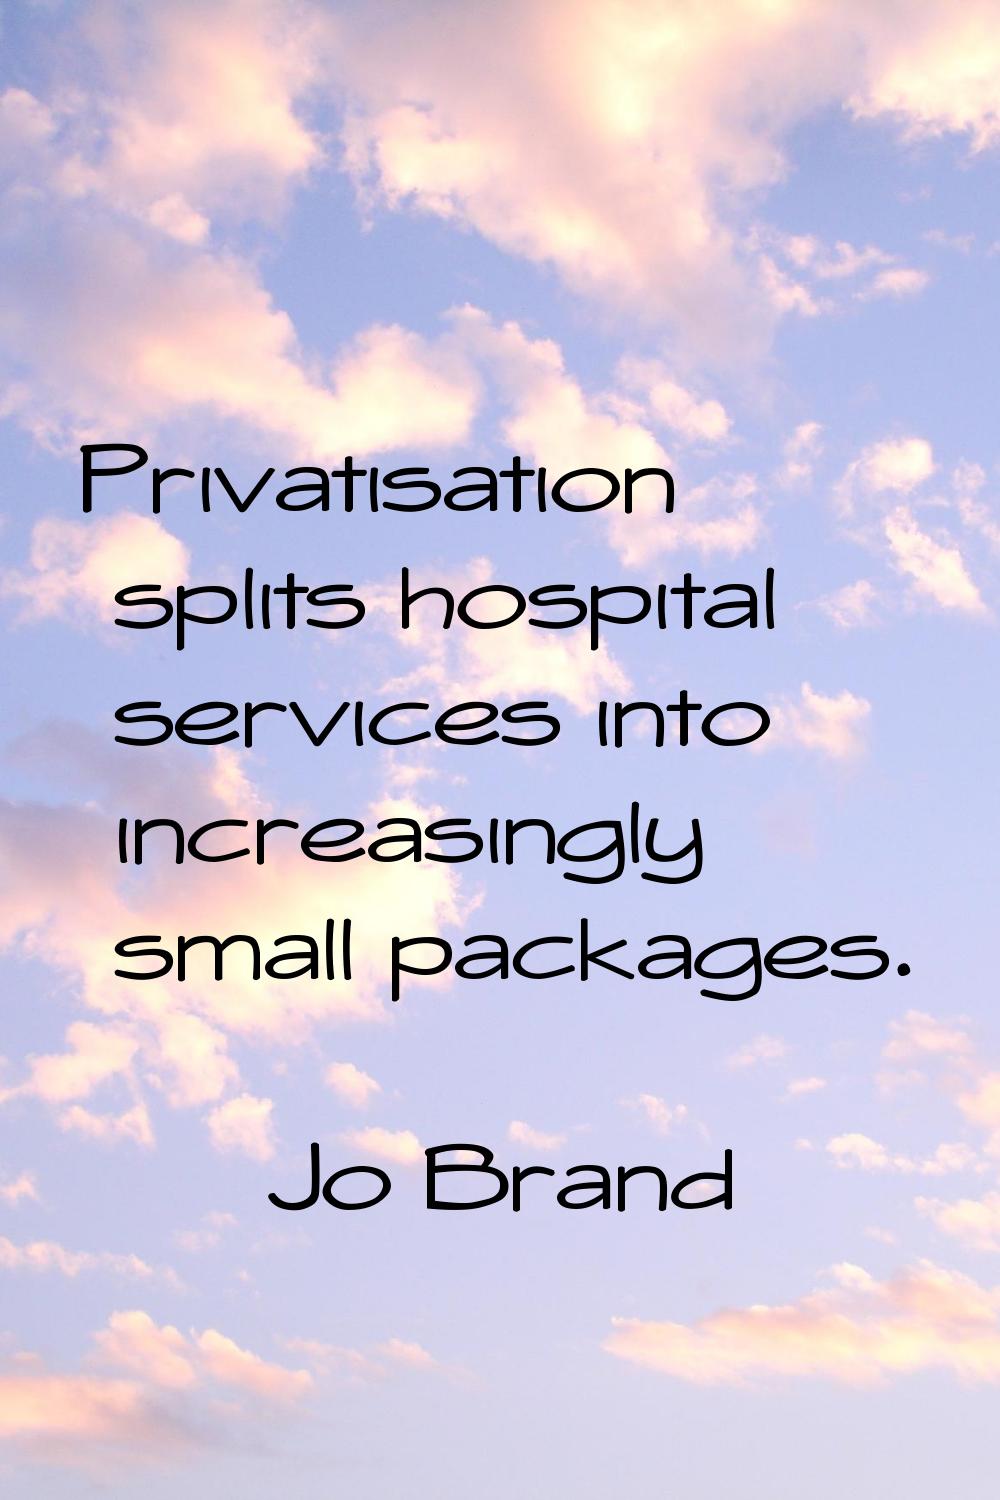 Privatisation splits hospital services into increasingly small packages.